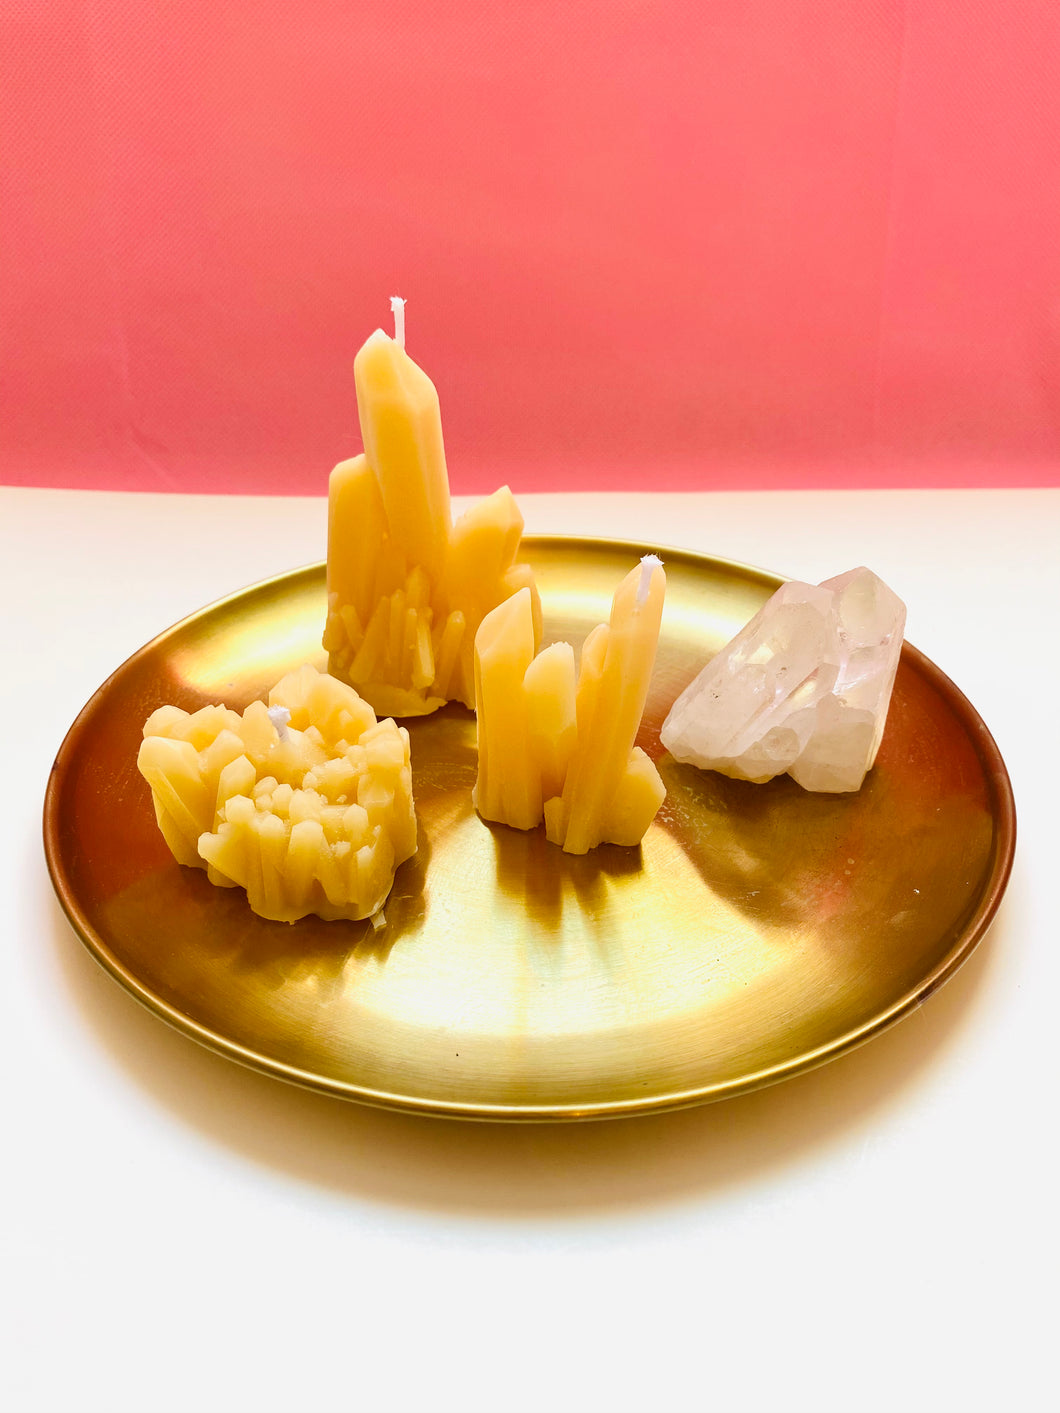 Gemstone Geode Beeswax Candles - 3 Pack